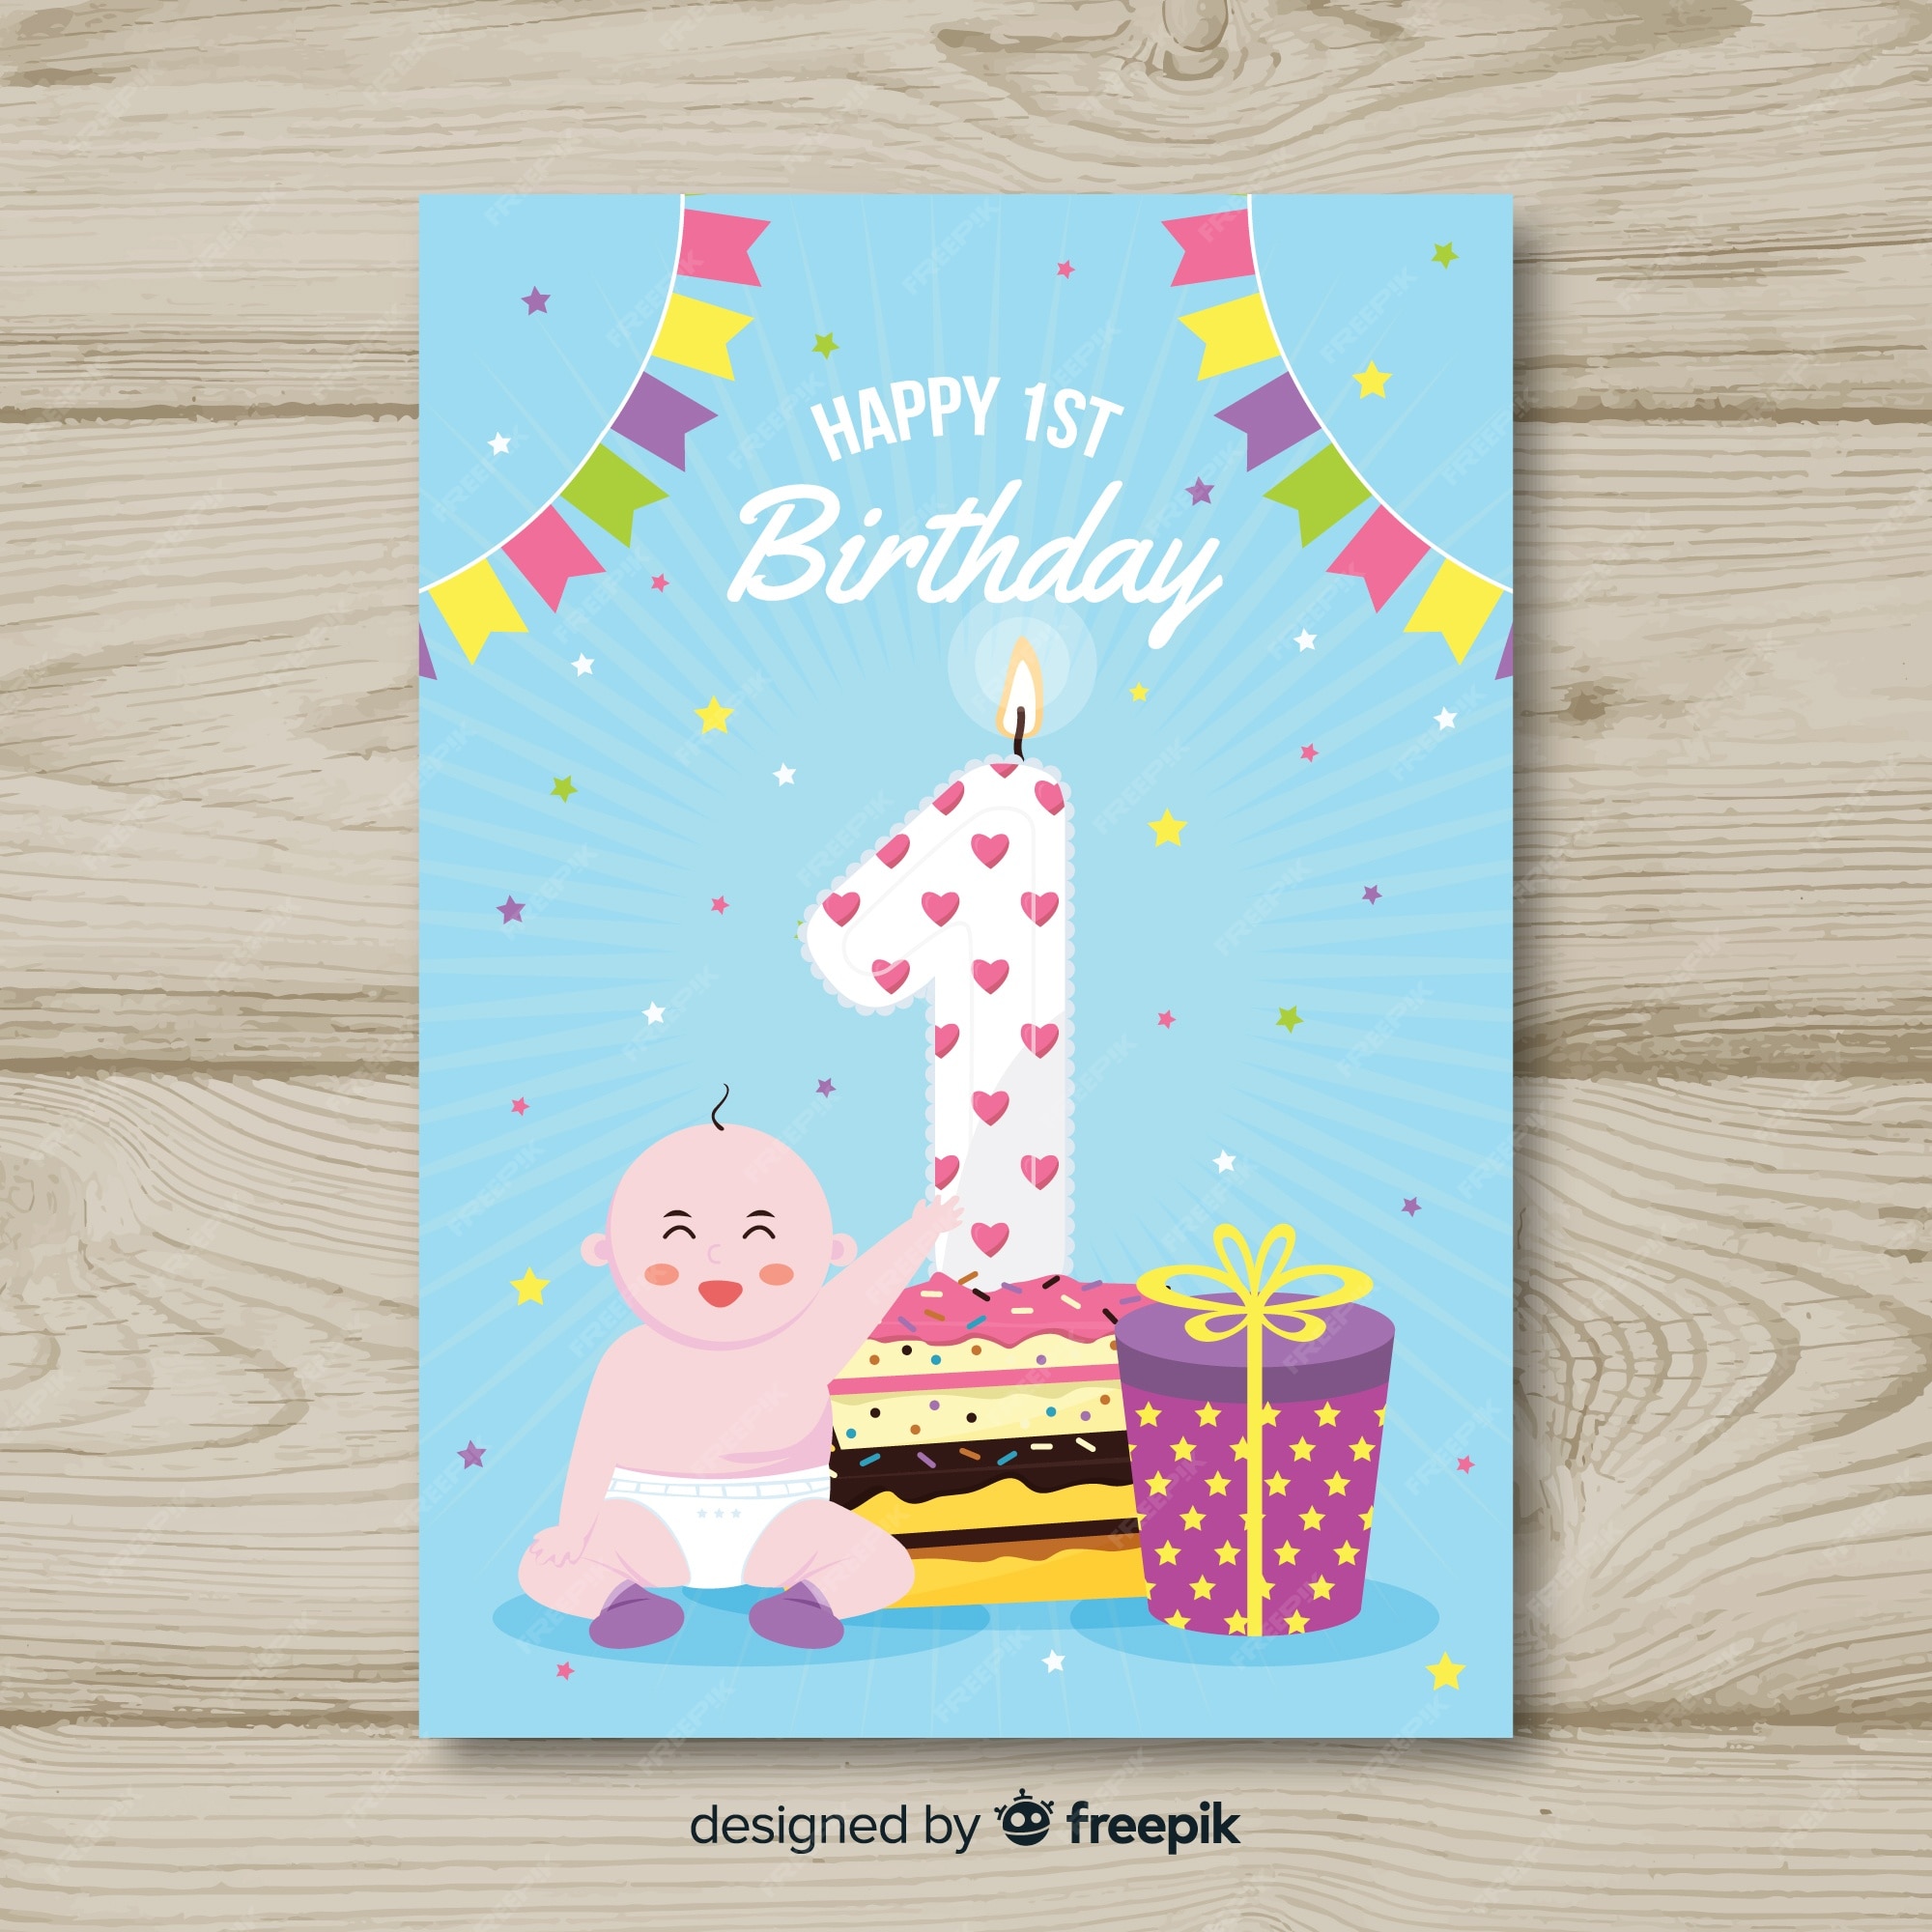 1st Birthday Banner - Free Vectors & PSDs to Download